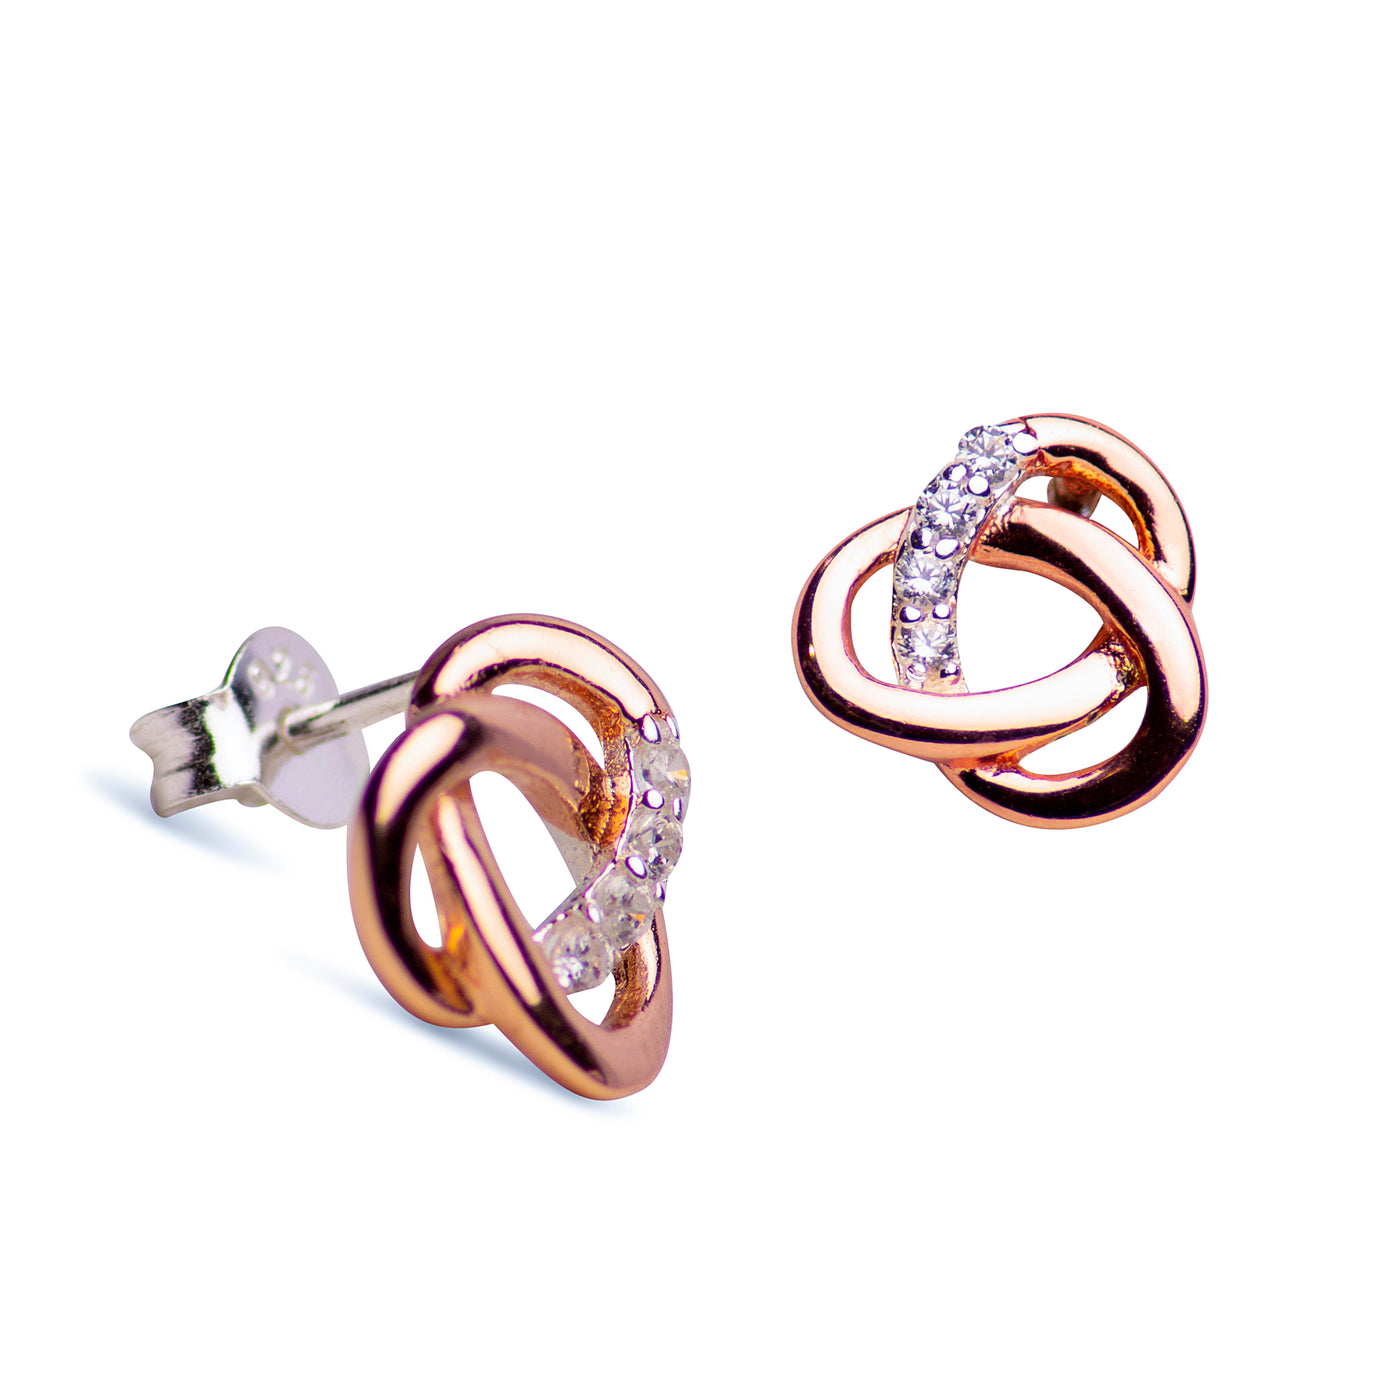 14K Rose Gold Plated Sterling Silver Knot Earrings | SilverAndGold